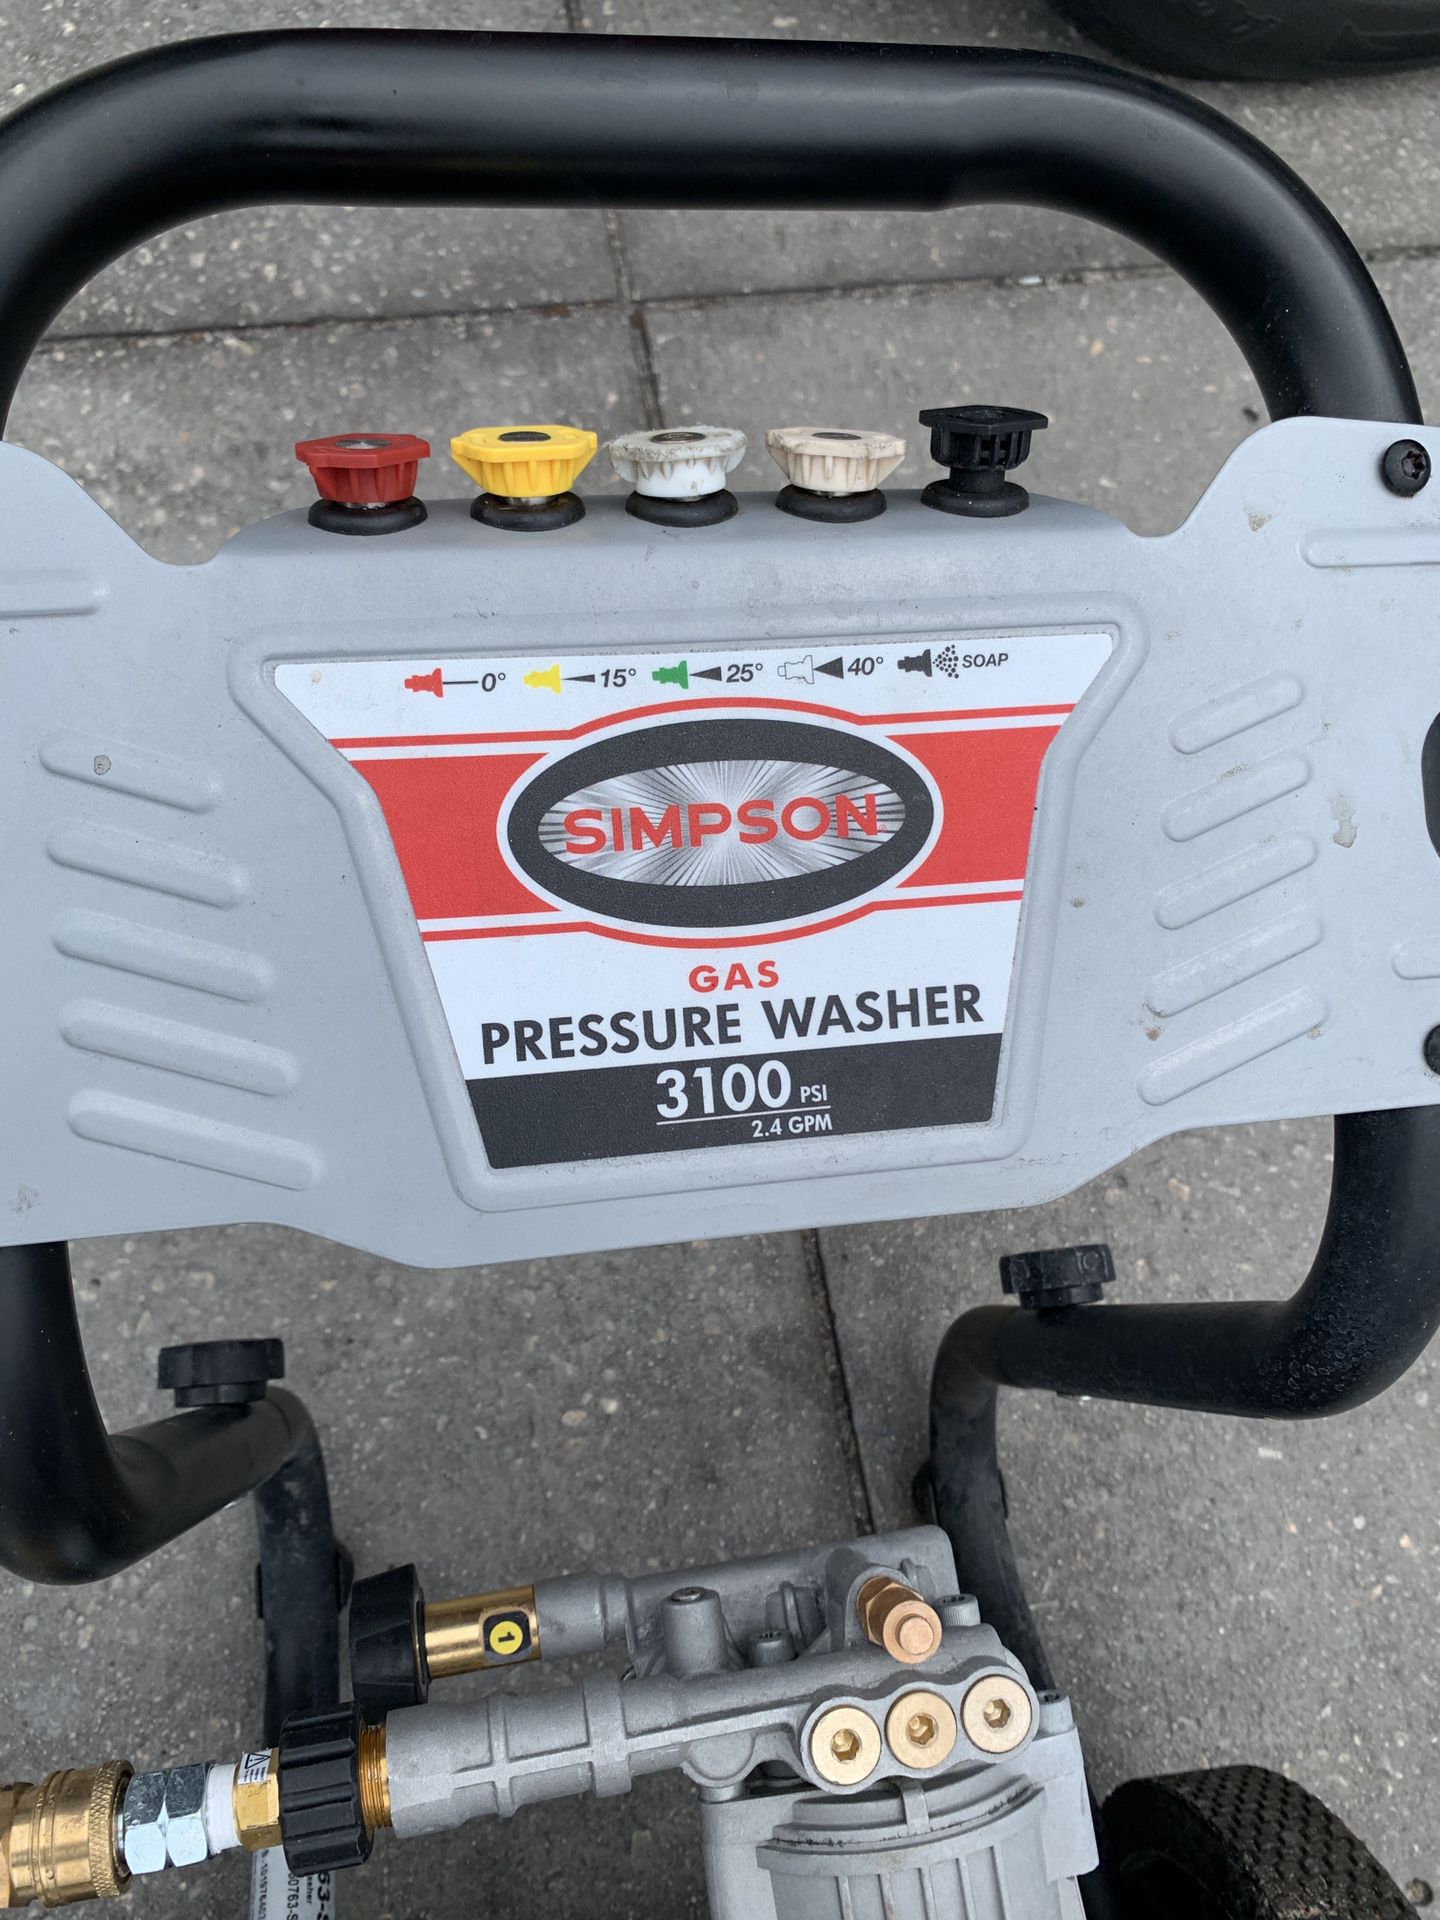 Simpson commercial pressure washer